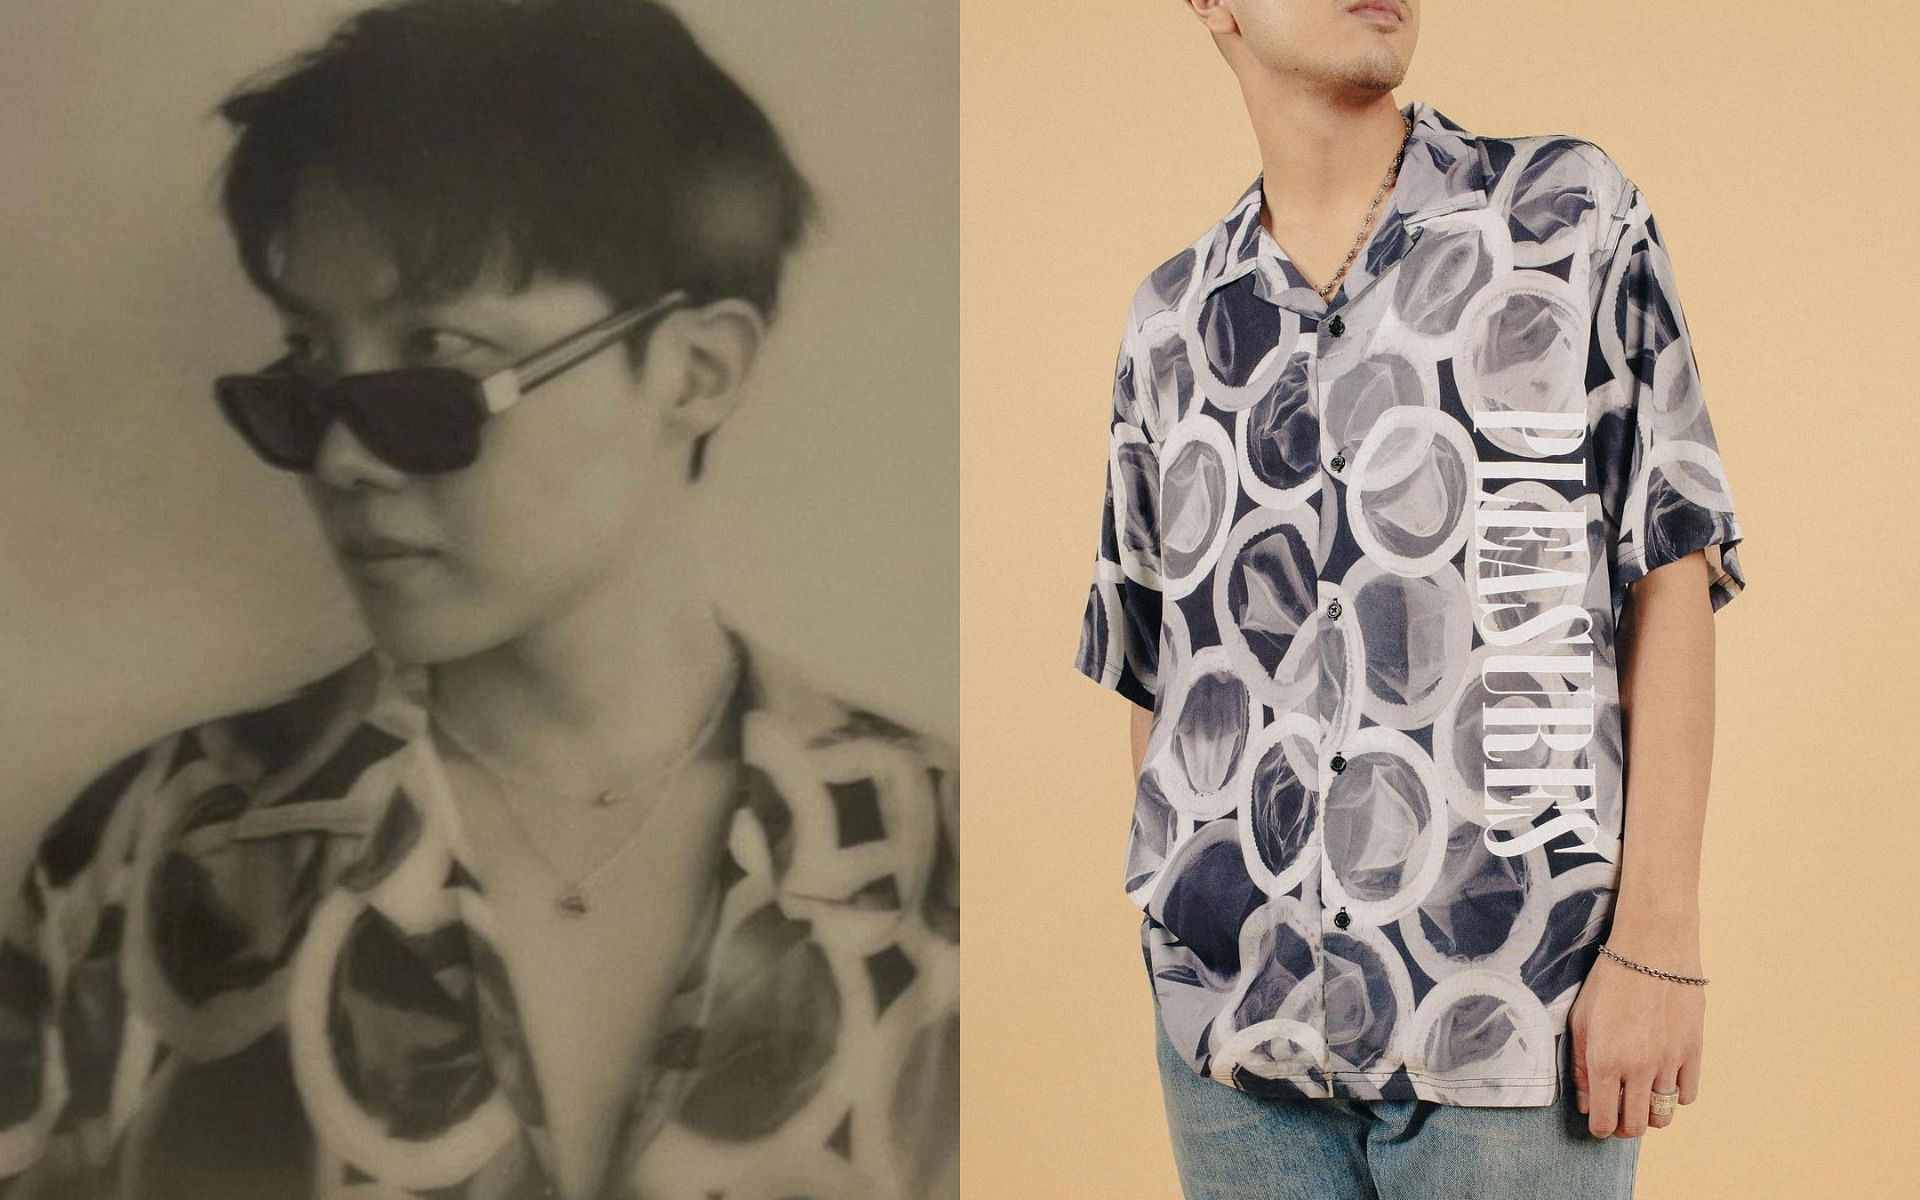 BTS J-Hope&#039;s Instagram post and Pleasures&#039; &#039;Protection&#039; Button Up shirt (Images via @uramyhope and @pleasures/Instagram)